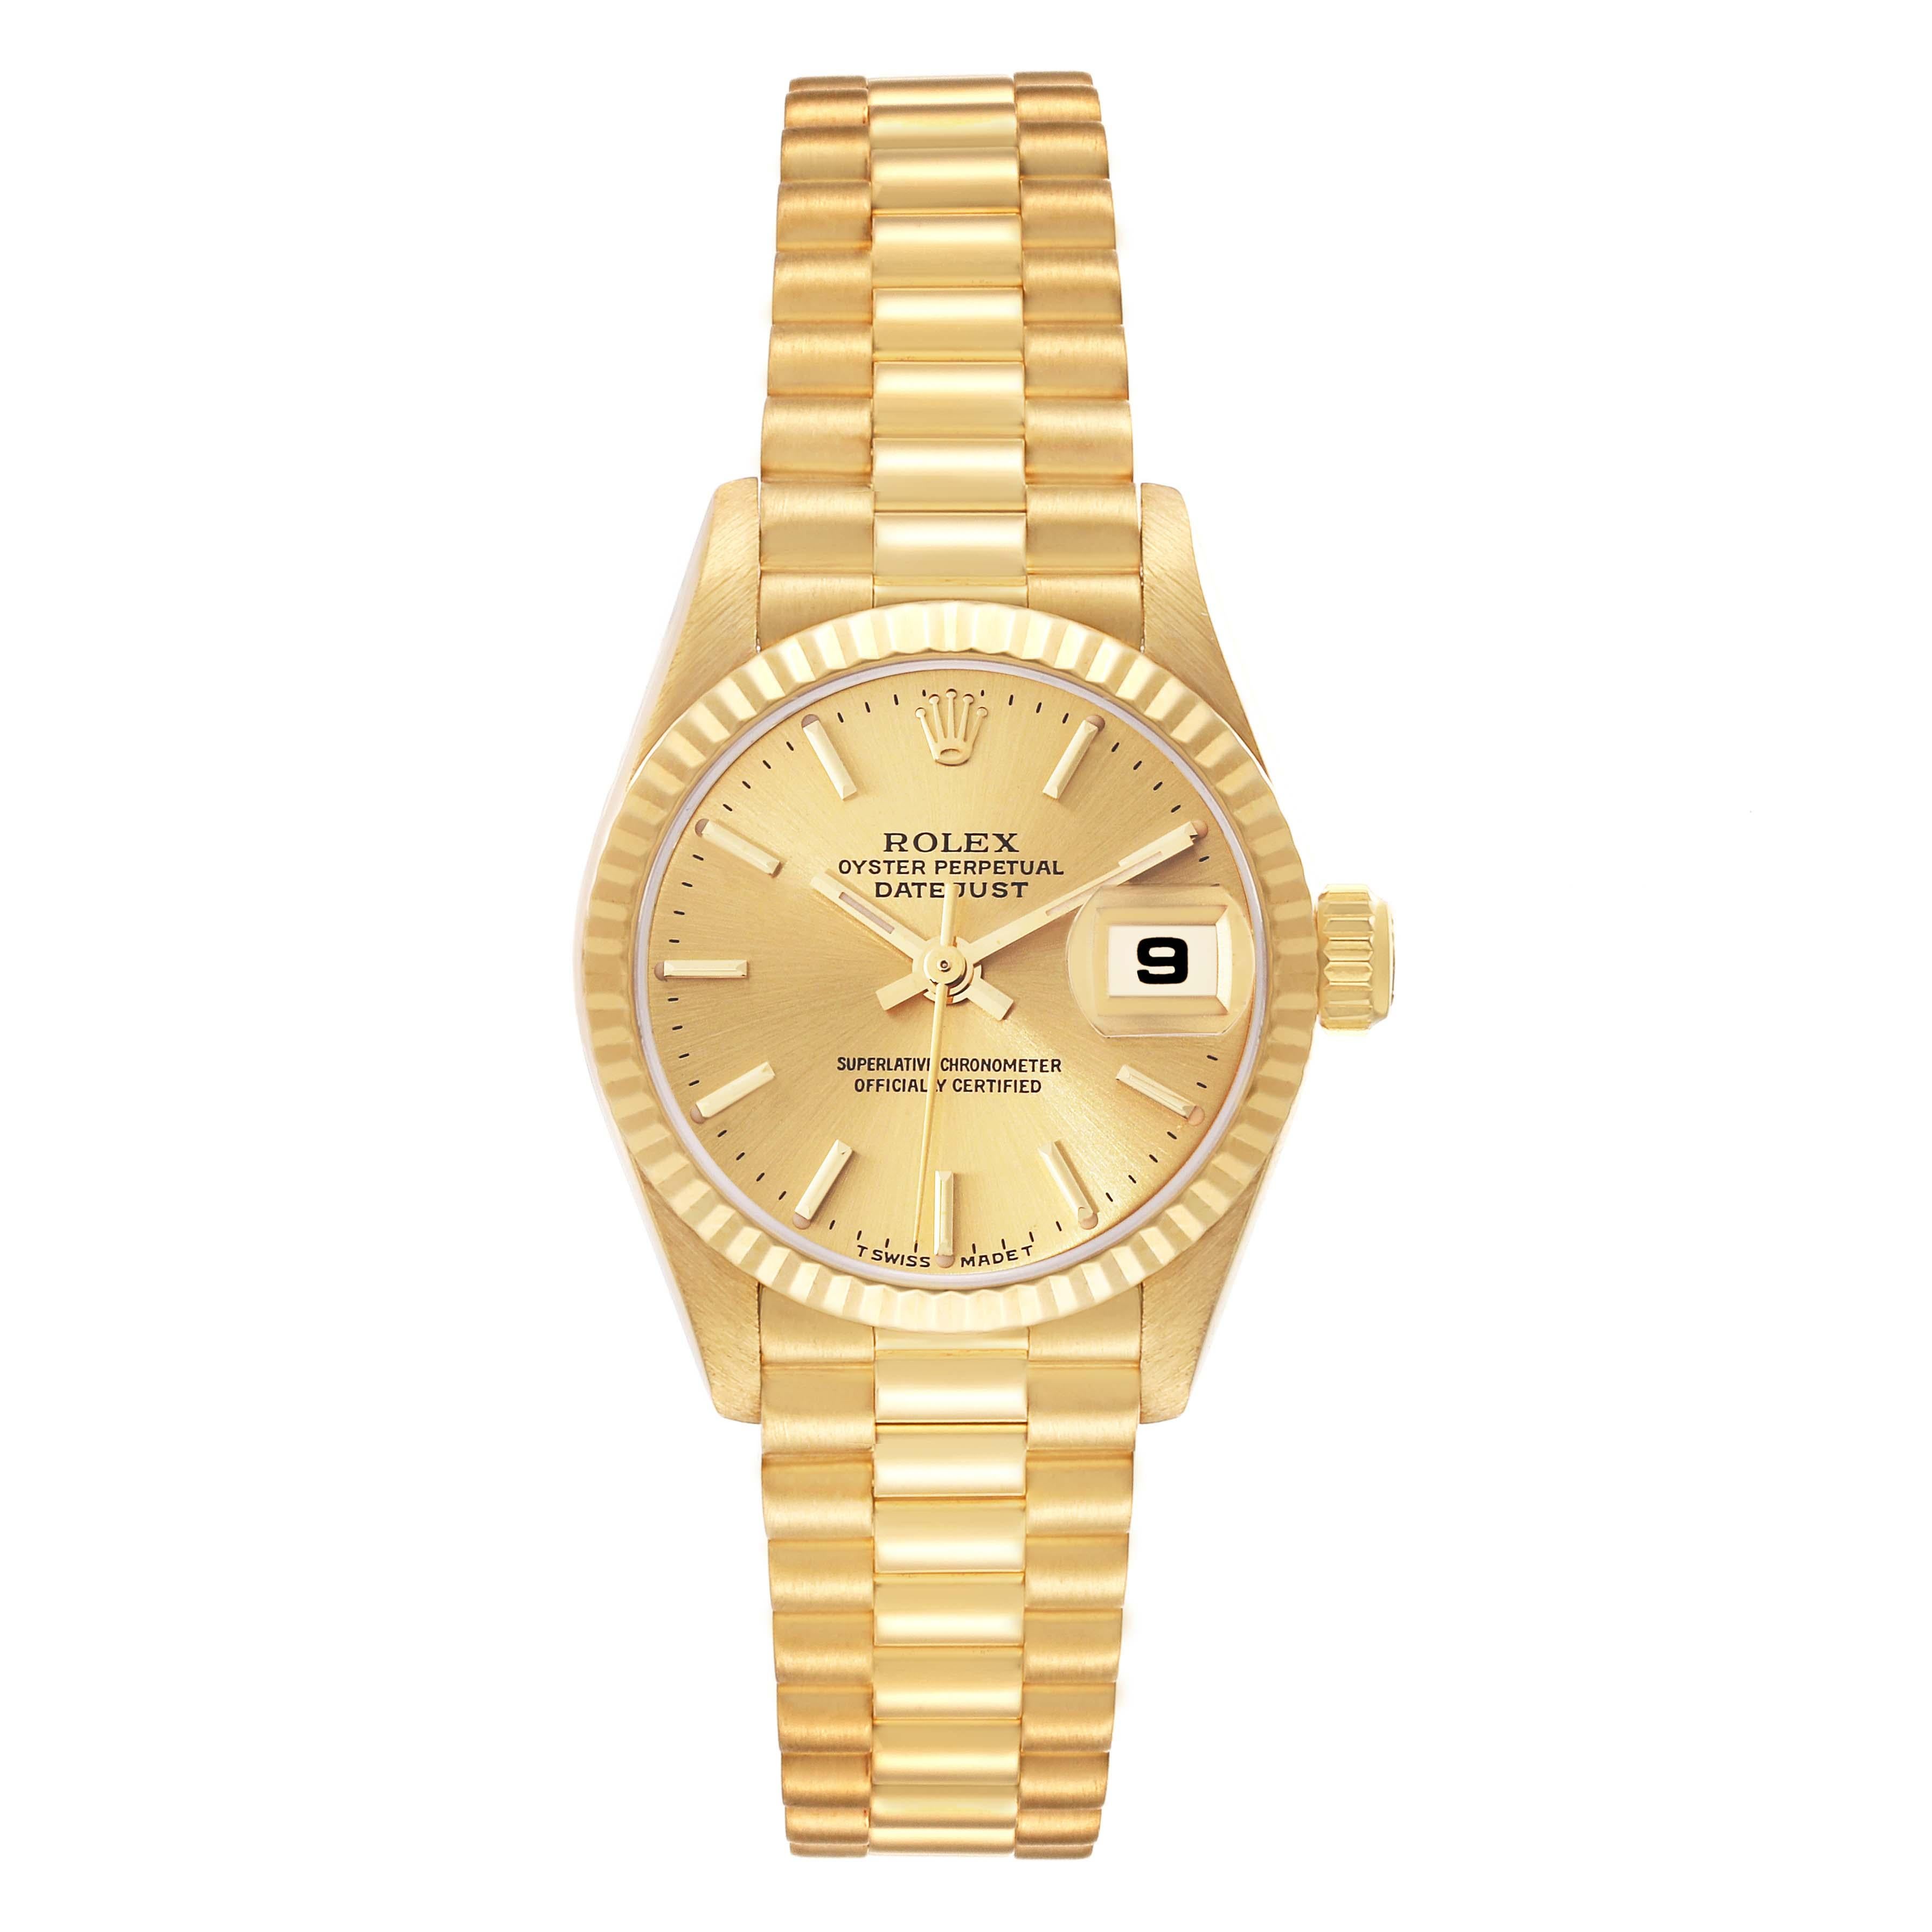 Rolex President Datejust 26mm 18k Yellow Gold Ladies Watch 79178. Officially certified chronometer self-winding movement with quickset date function. 18k yellow gold oyster case 26 mm in diameter. Rolex logo on a crown. 18k yellow gold fluted bezel.